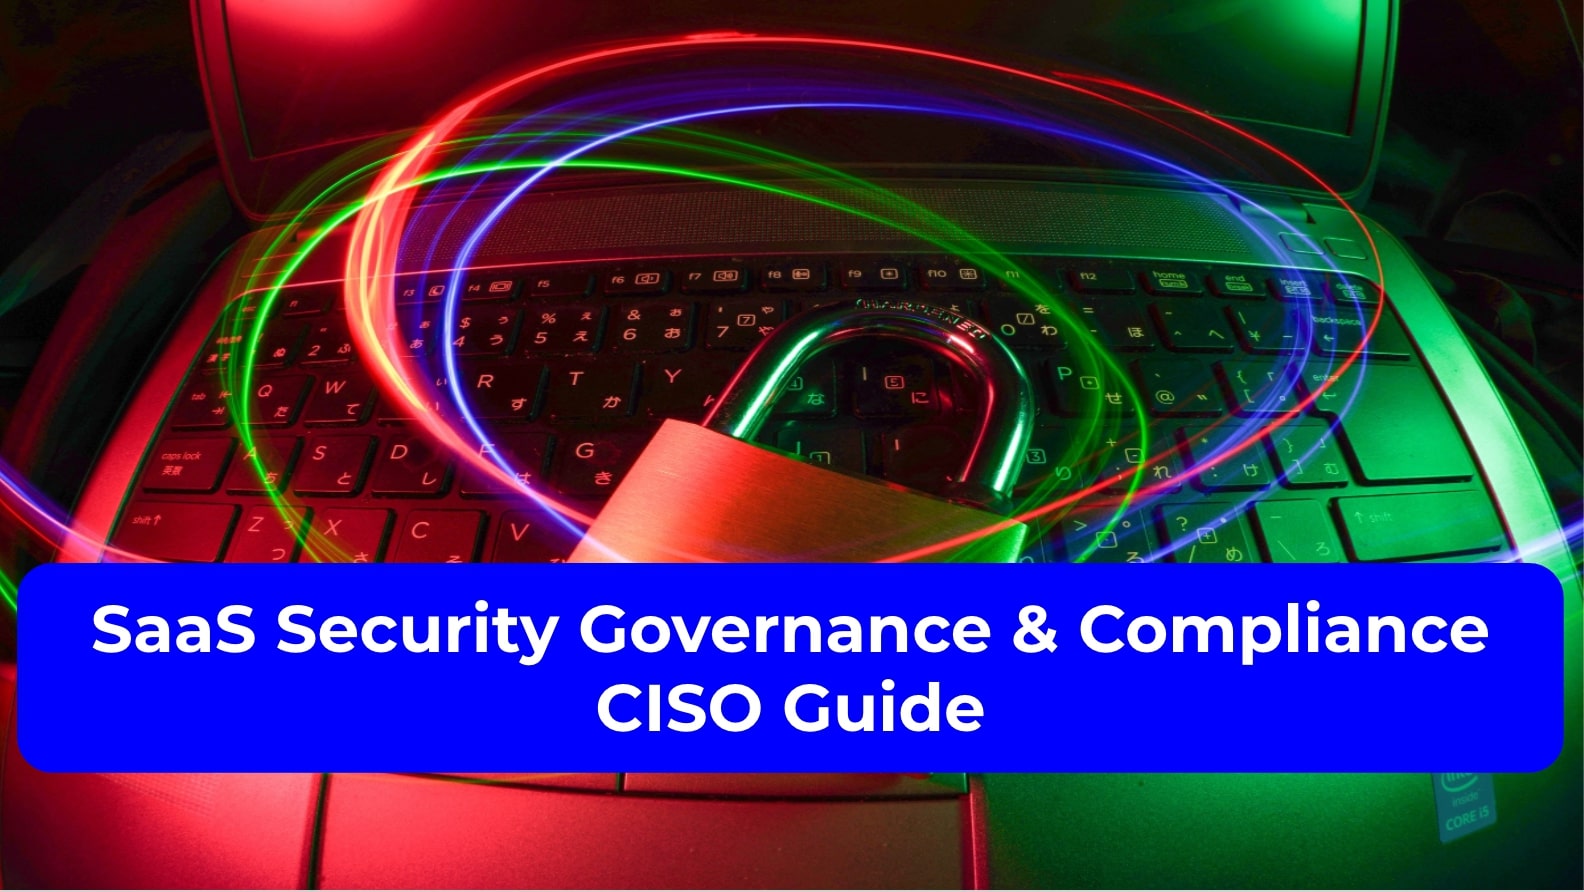 SaaS Security Governance & Compliance CISO Guide